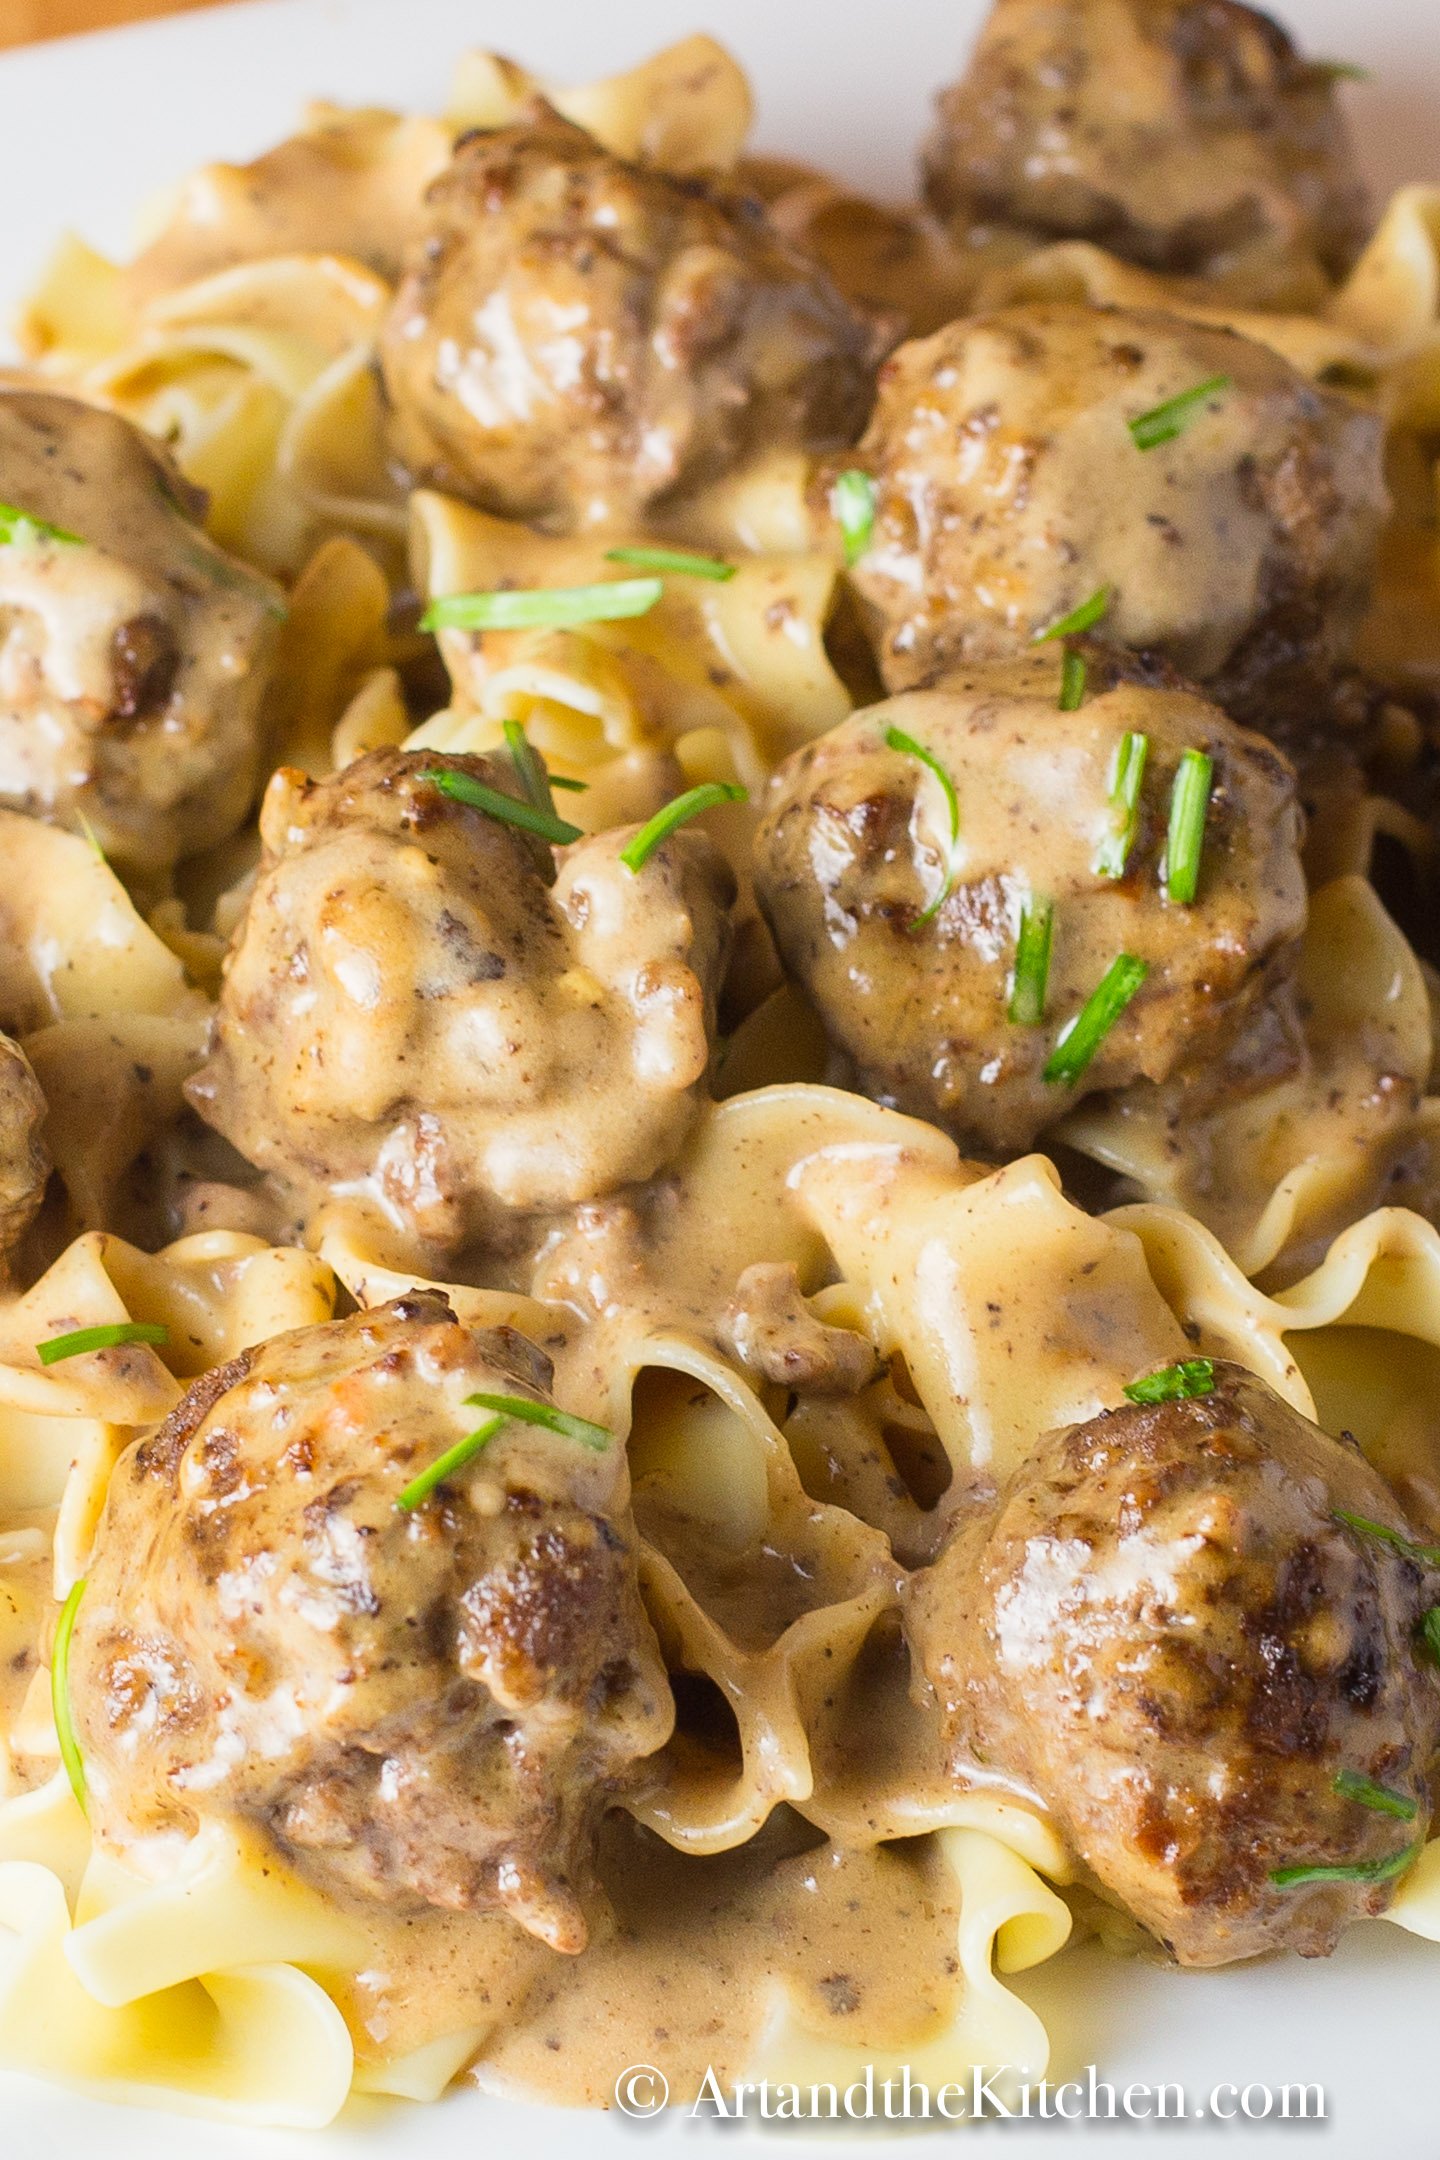 Broad noodles topped with meatballs in a creamy sauce on a white plate.